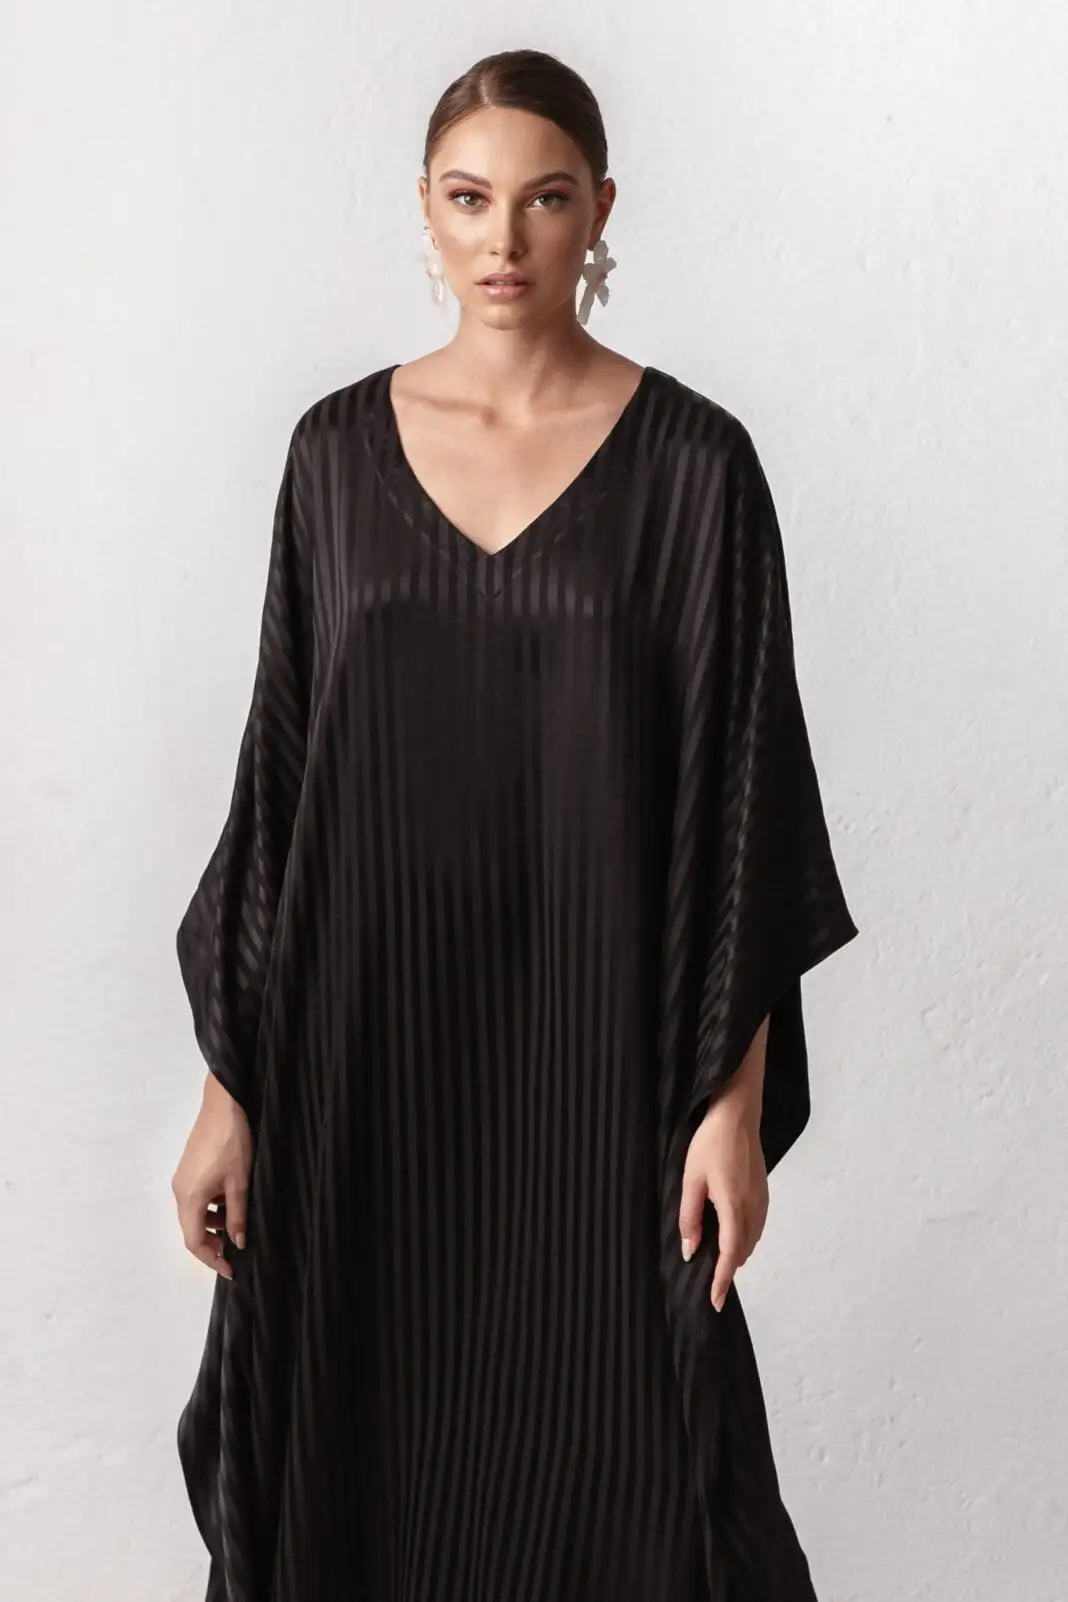 Dark mysterious caftan dress for women, made in Europe by House of Azoiia